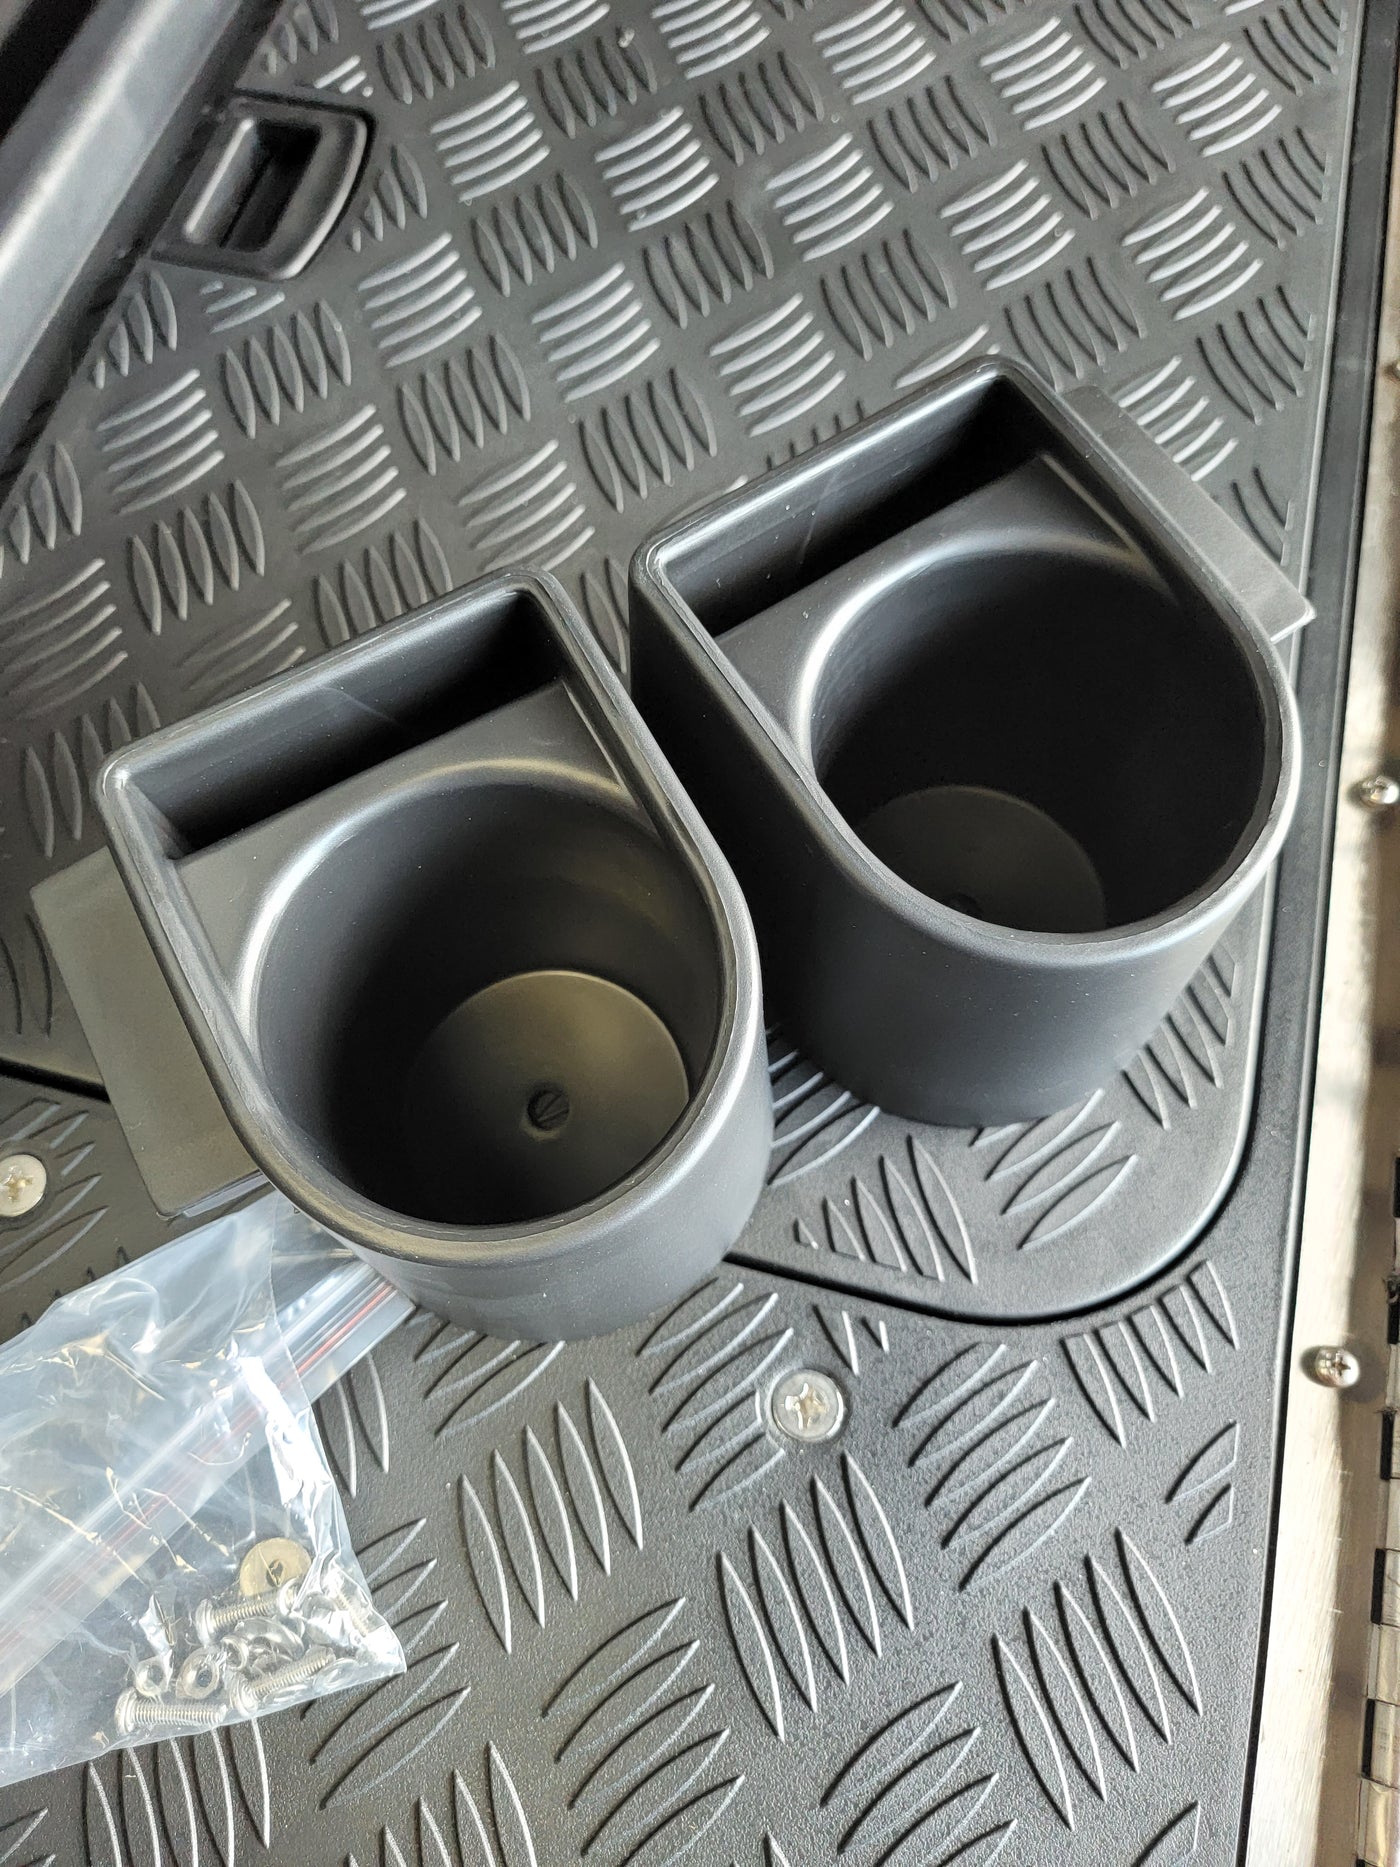 Evolution Golf Cart Cupholders for Rear Seat